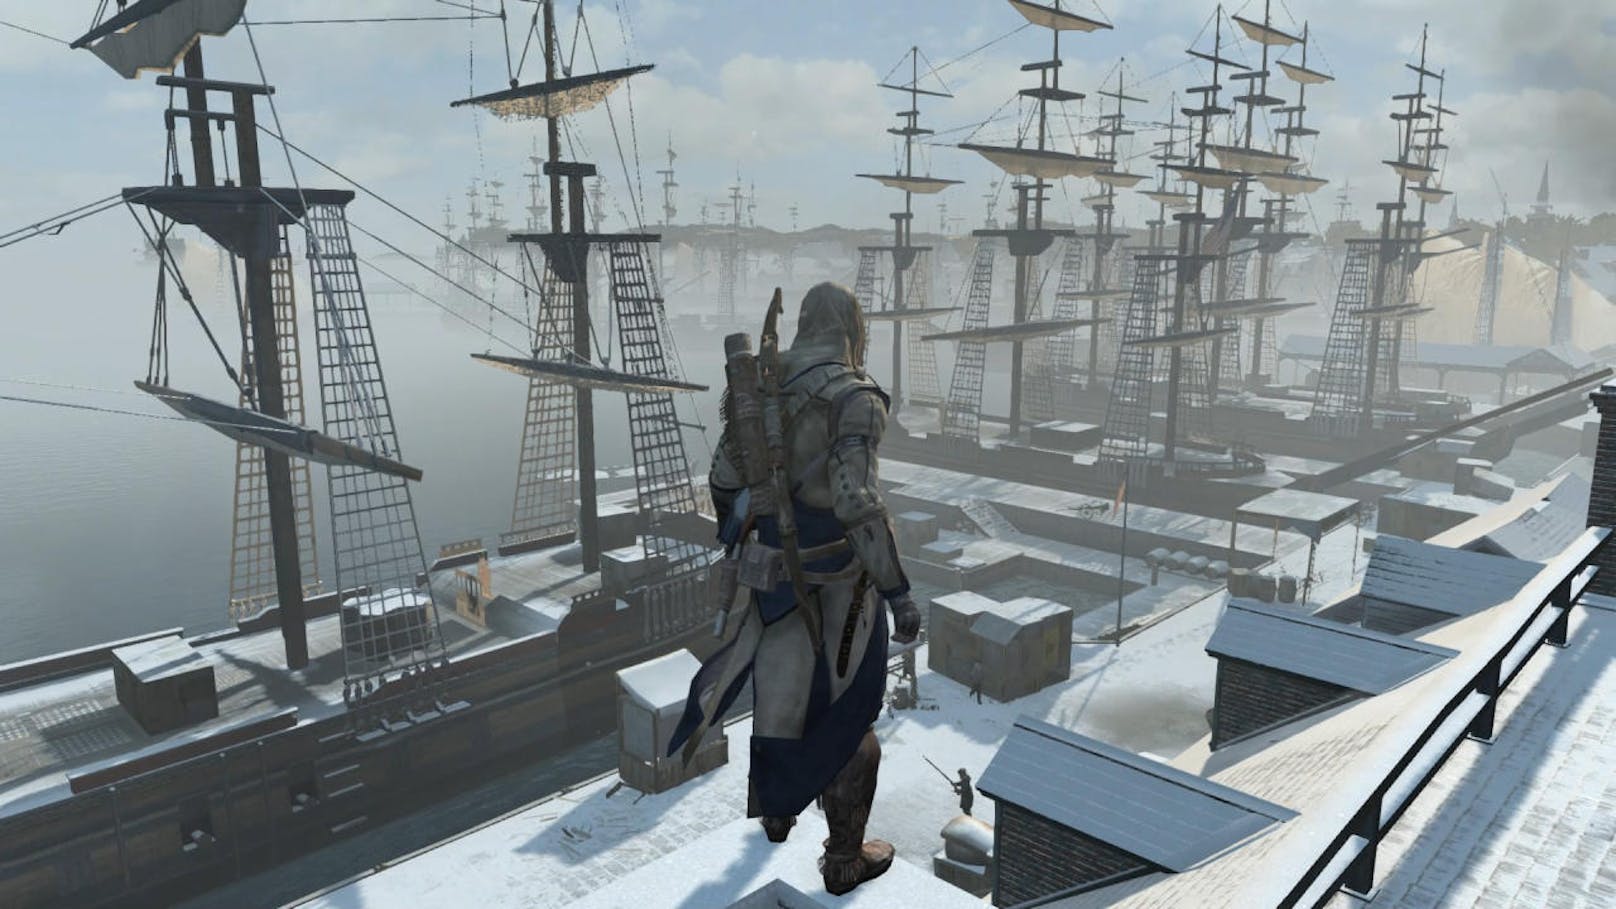  <a href="https://www.heute.at/digital/games/story/Assassins-Creed-III-Remastered-Nintendo-Switch-Test-Review-Ubisoft-56418161" target="_blank">Assassin's Creed III Remastered (Switch)</a>